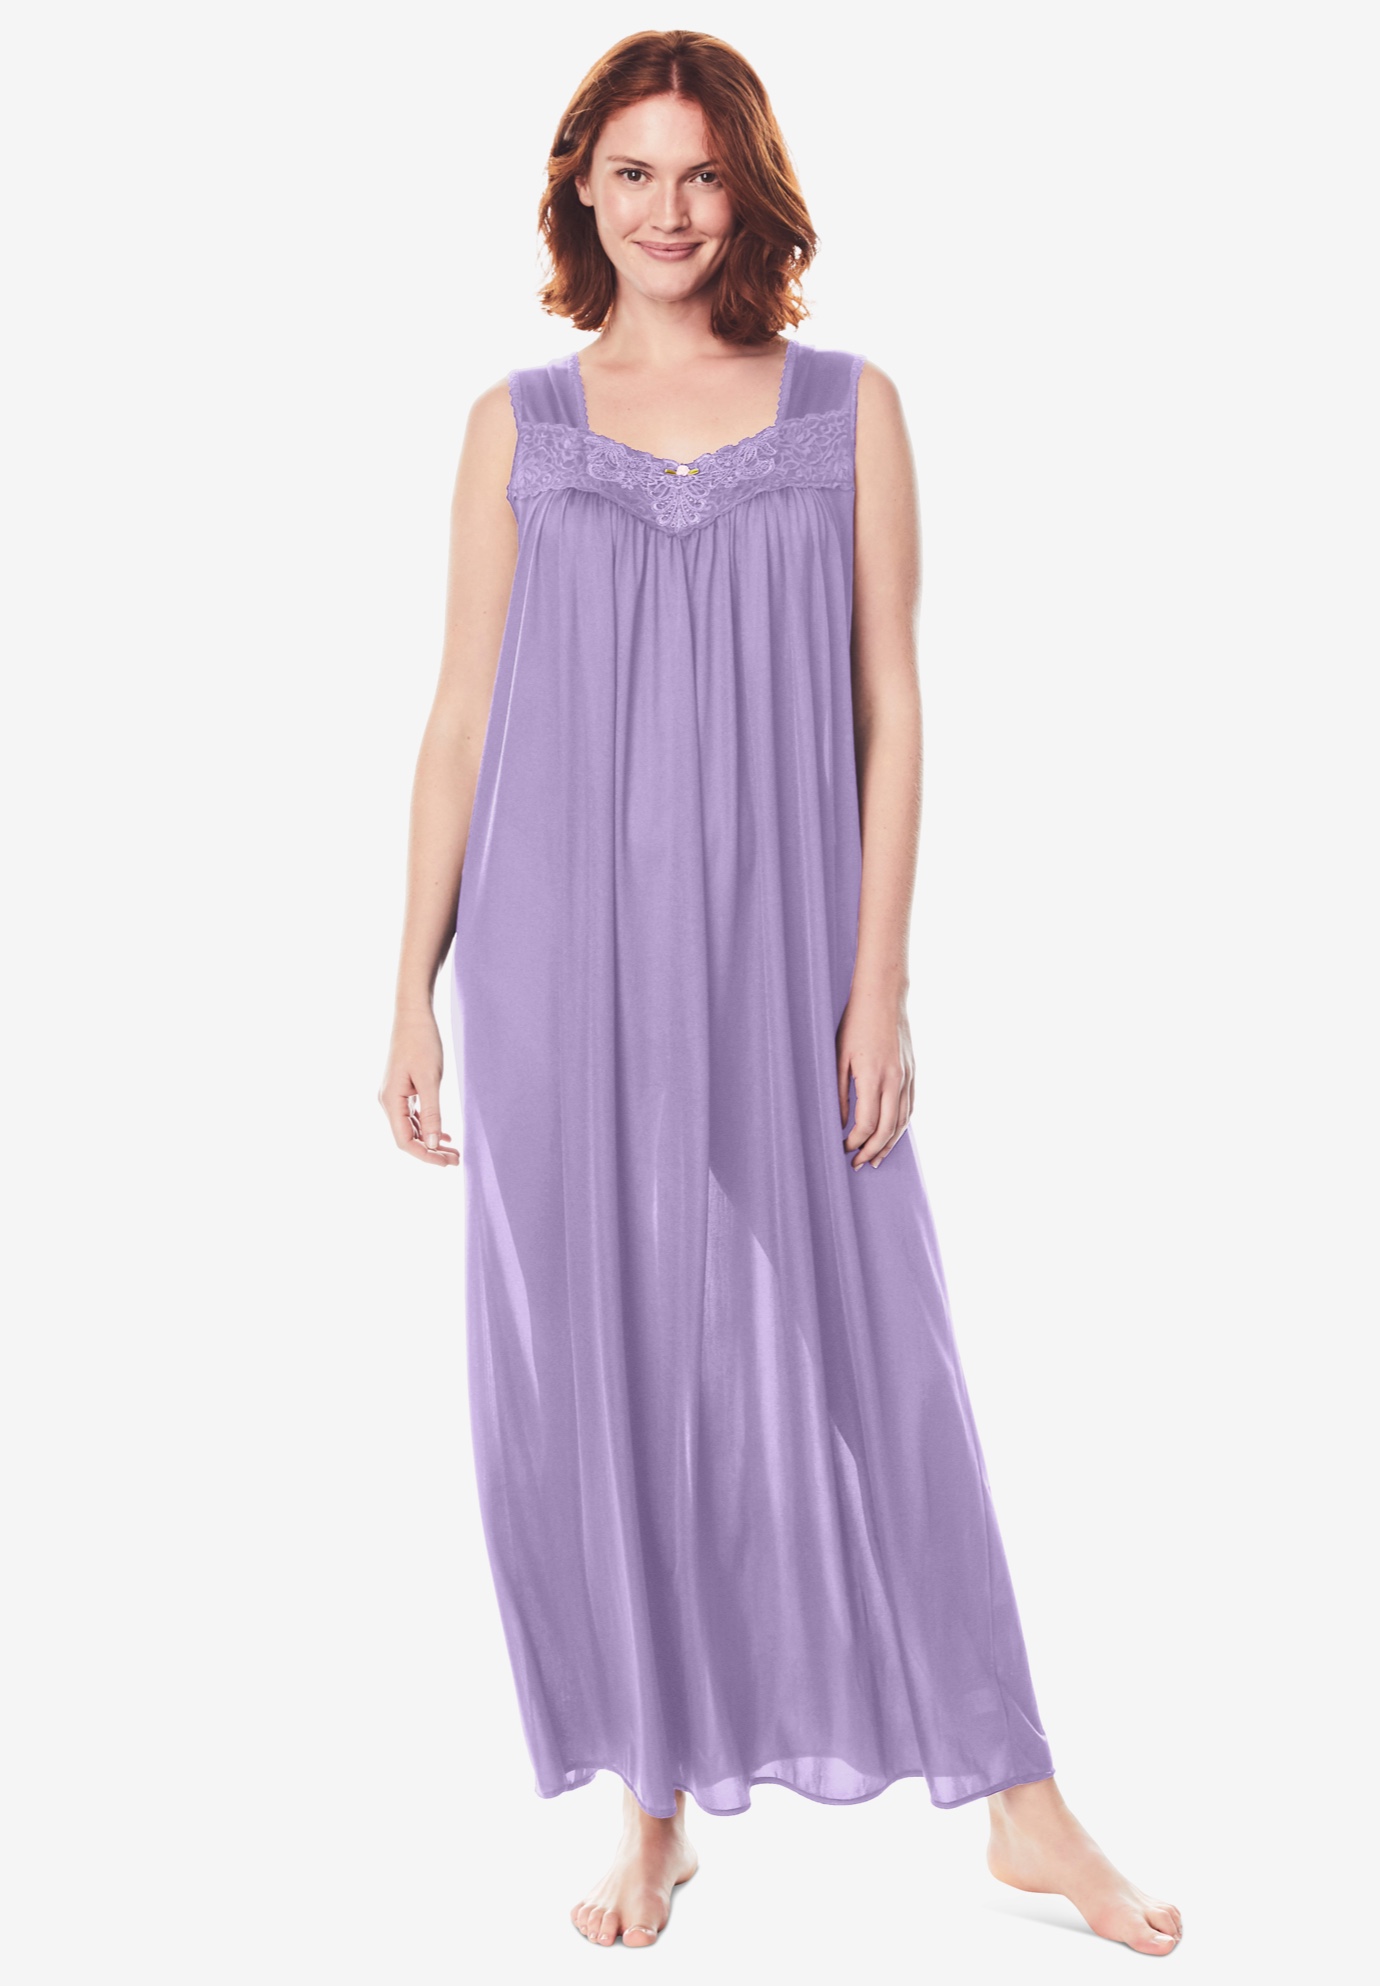 Long Tricot Knit Nightgown | Woman Within